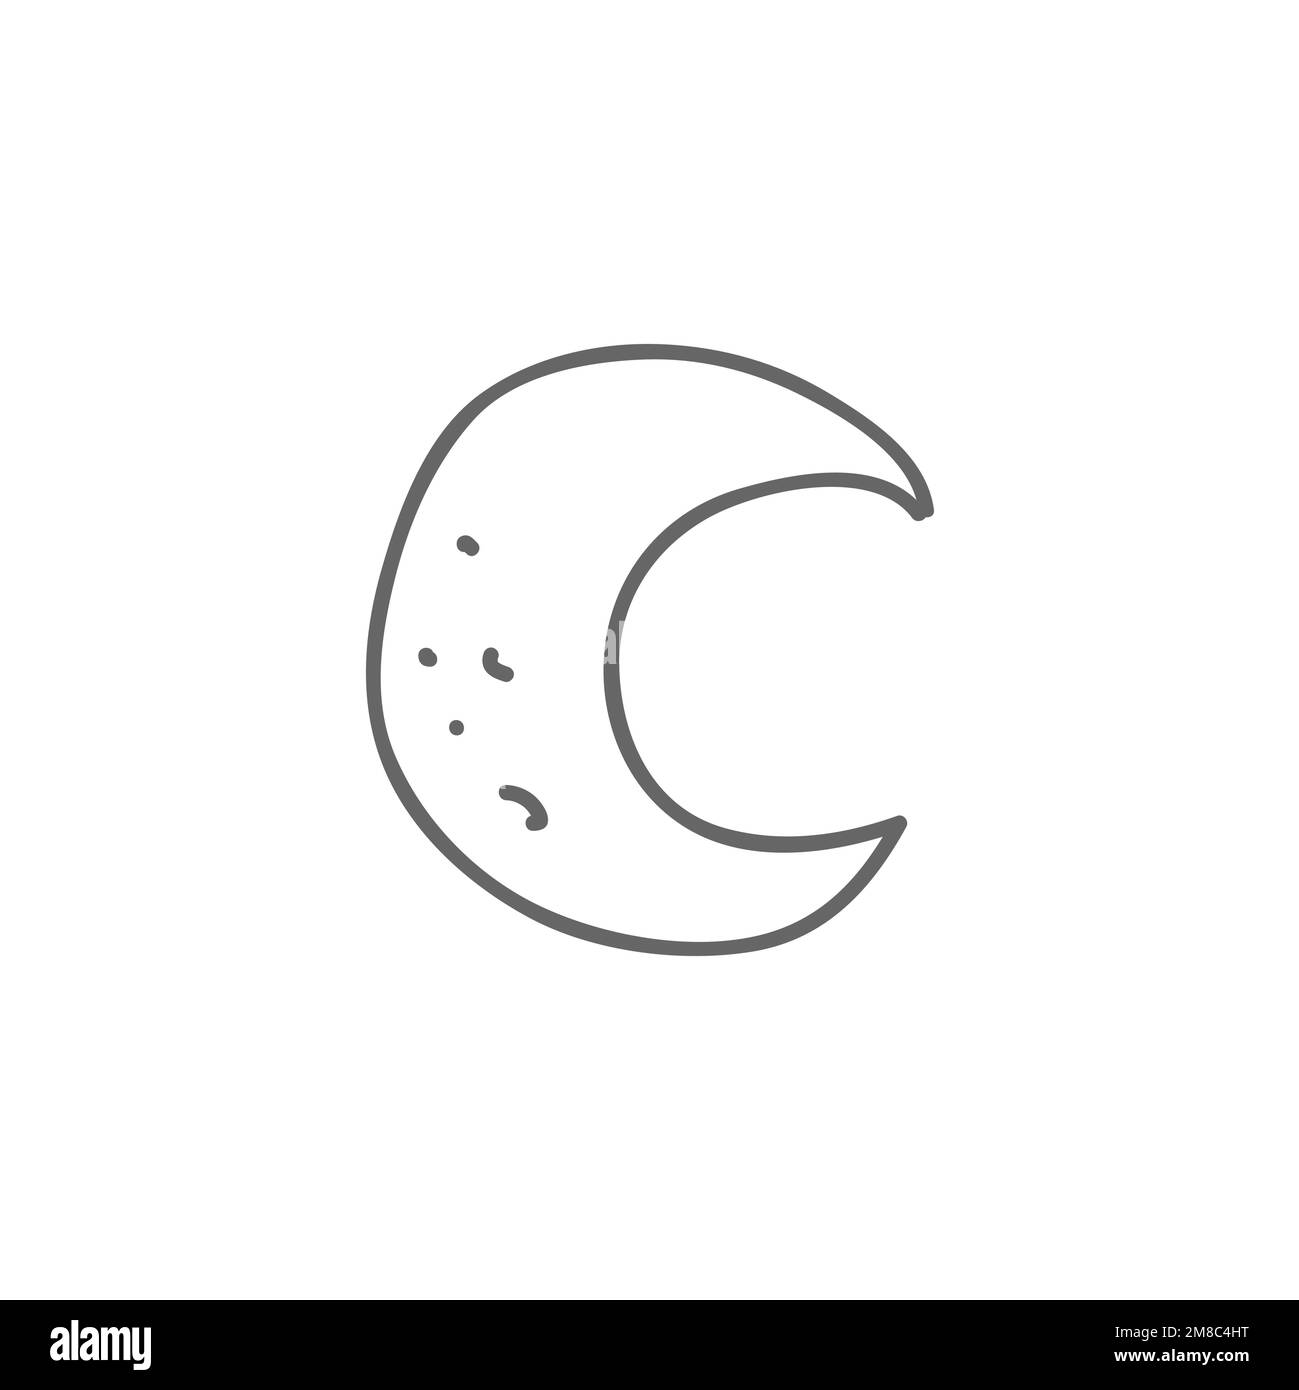 Moon icon, common graphic resources, vector illustration. Stock Vector